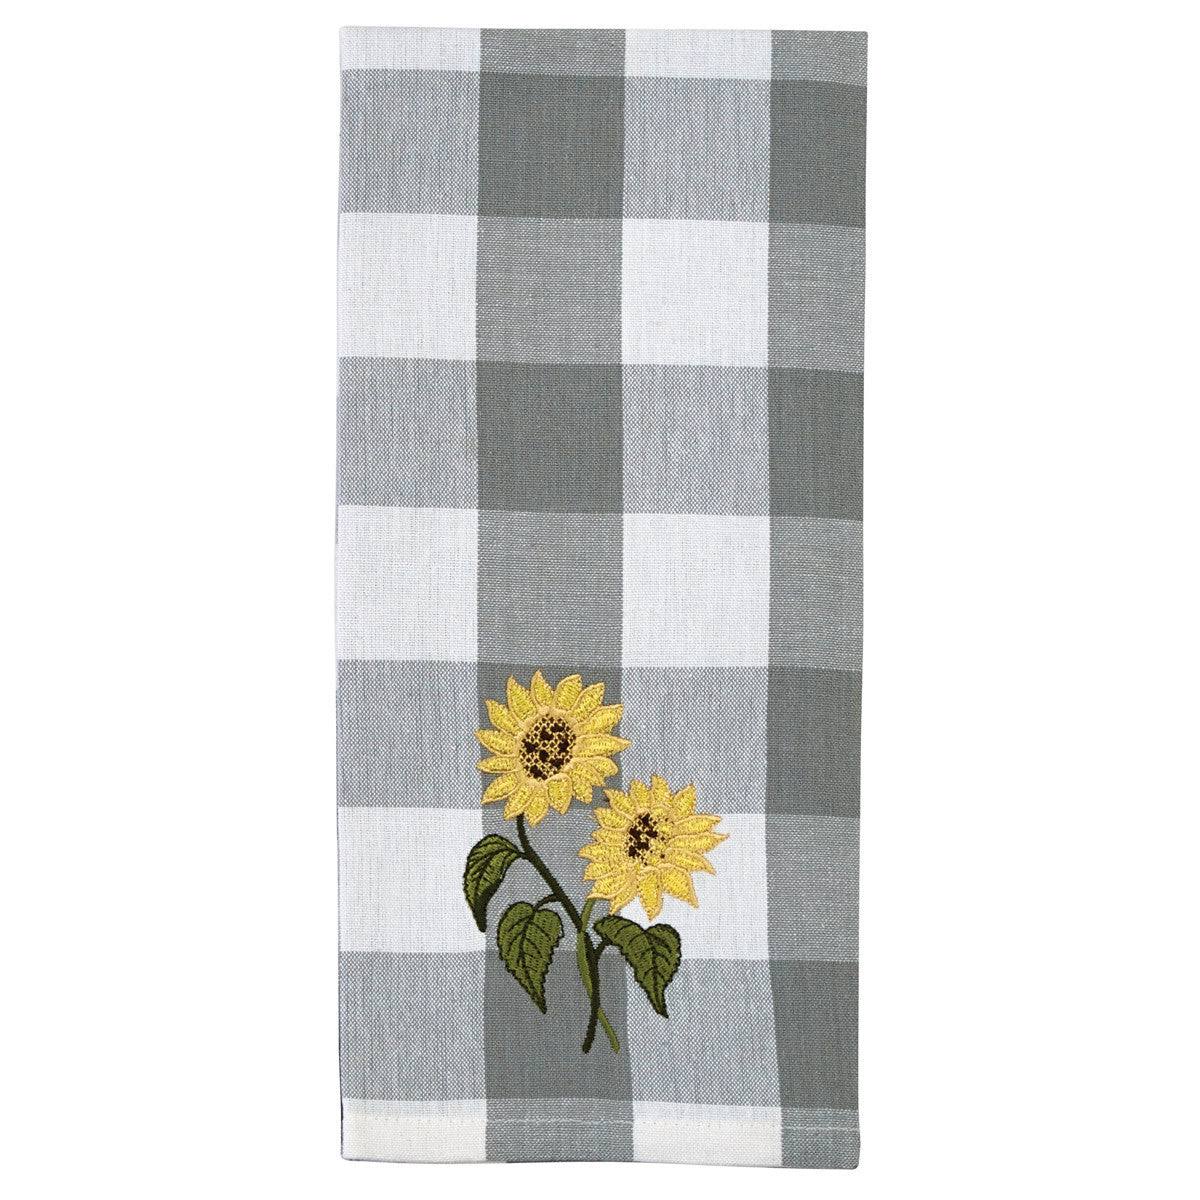 Wicklow Check Sunflower Embroidered Decorative Dishtowel